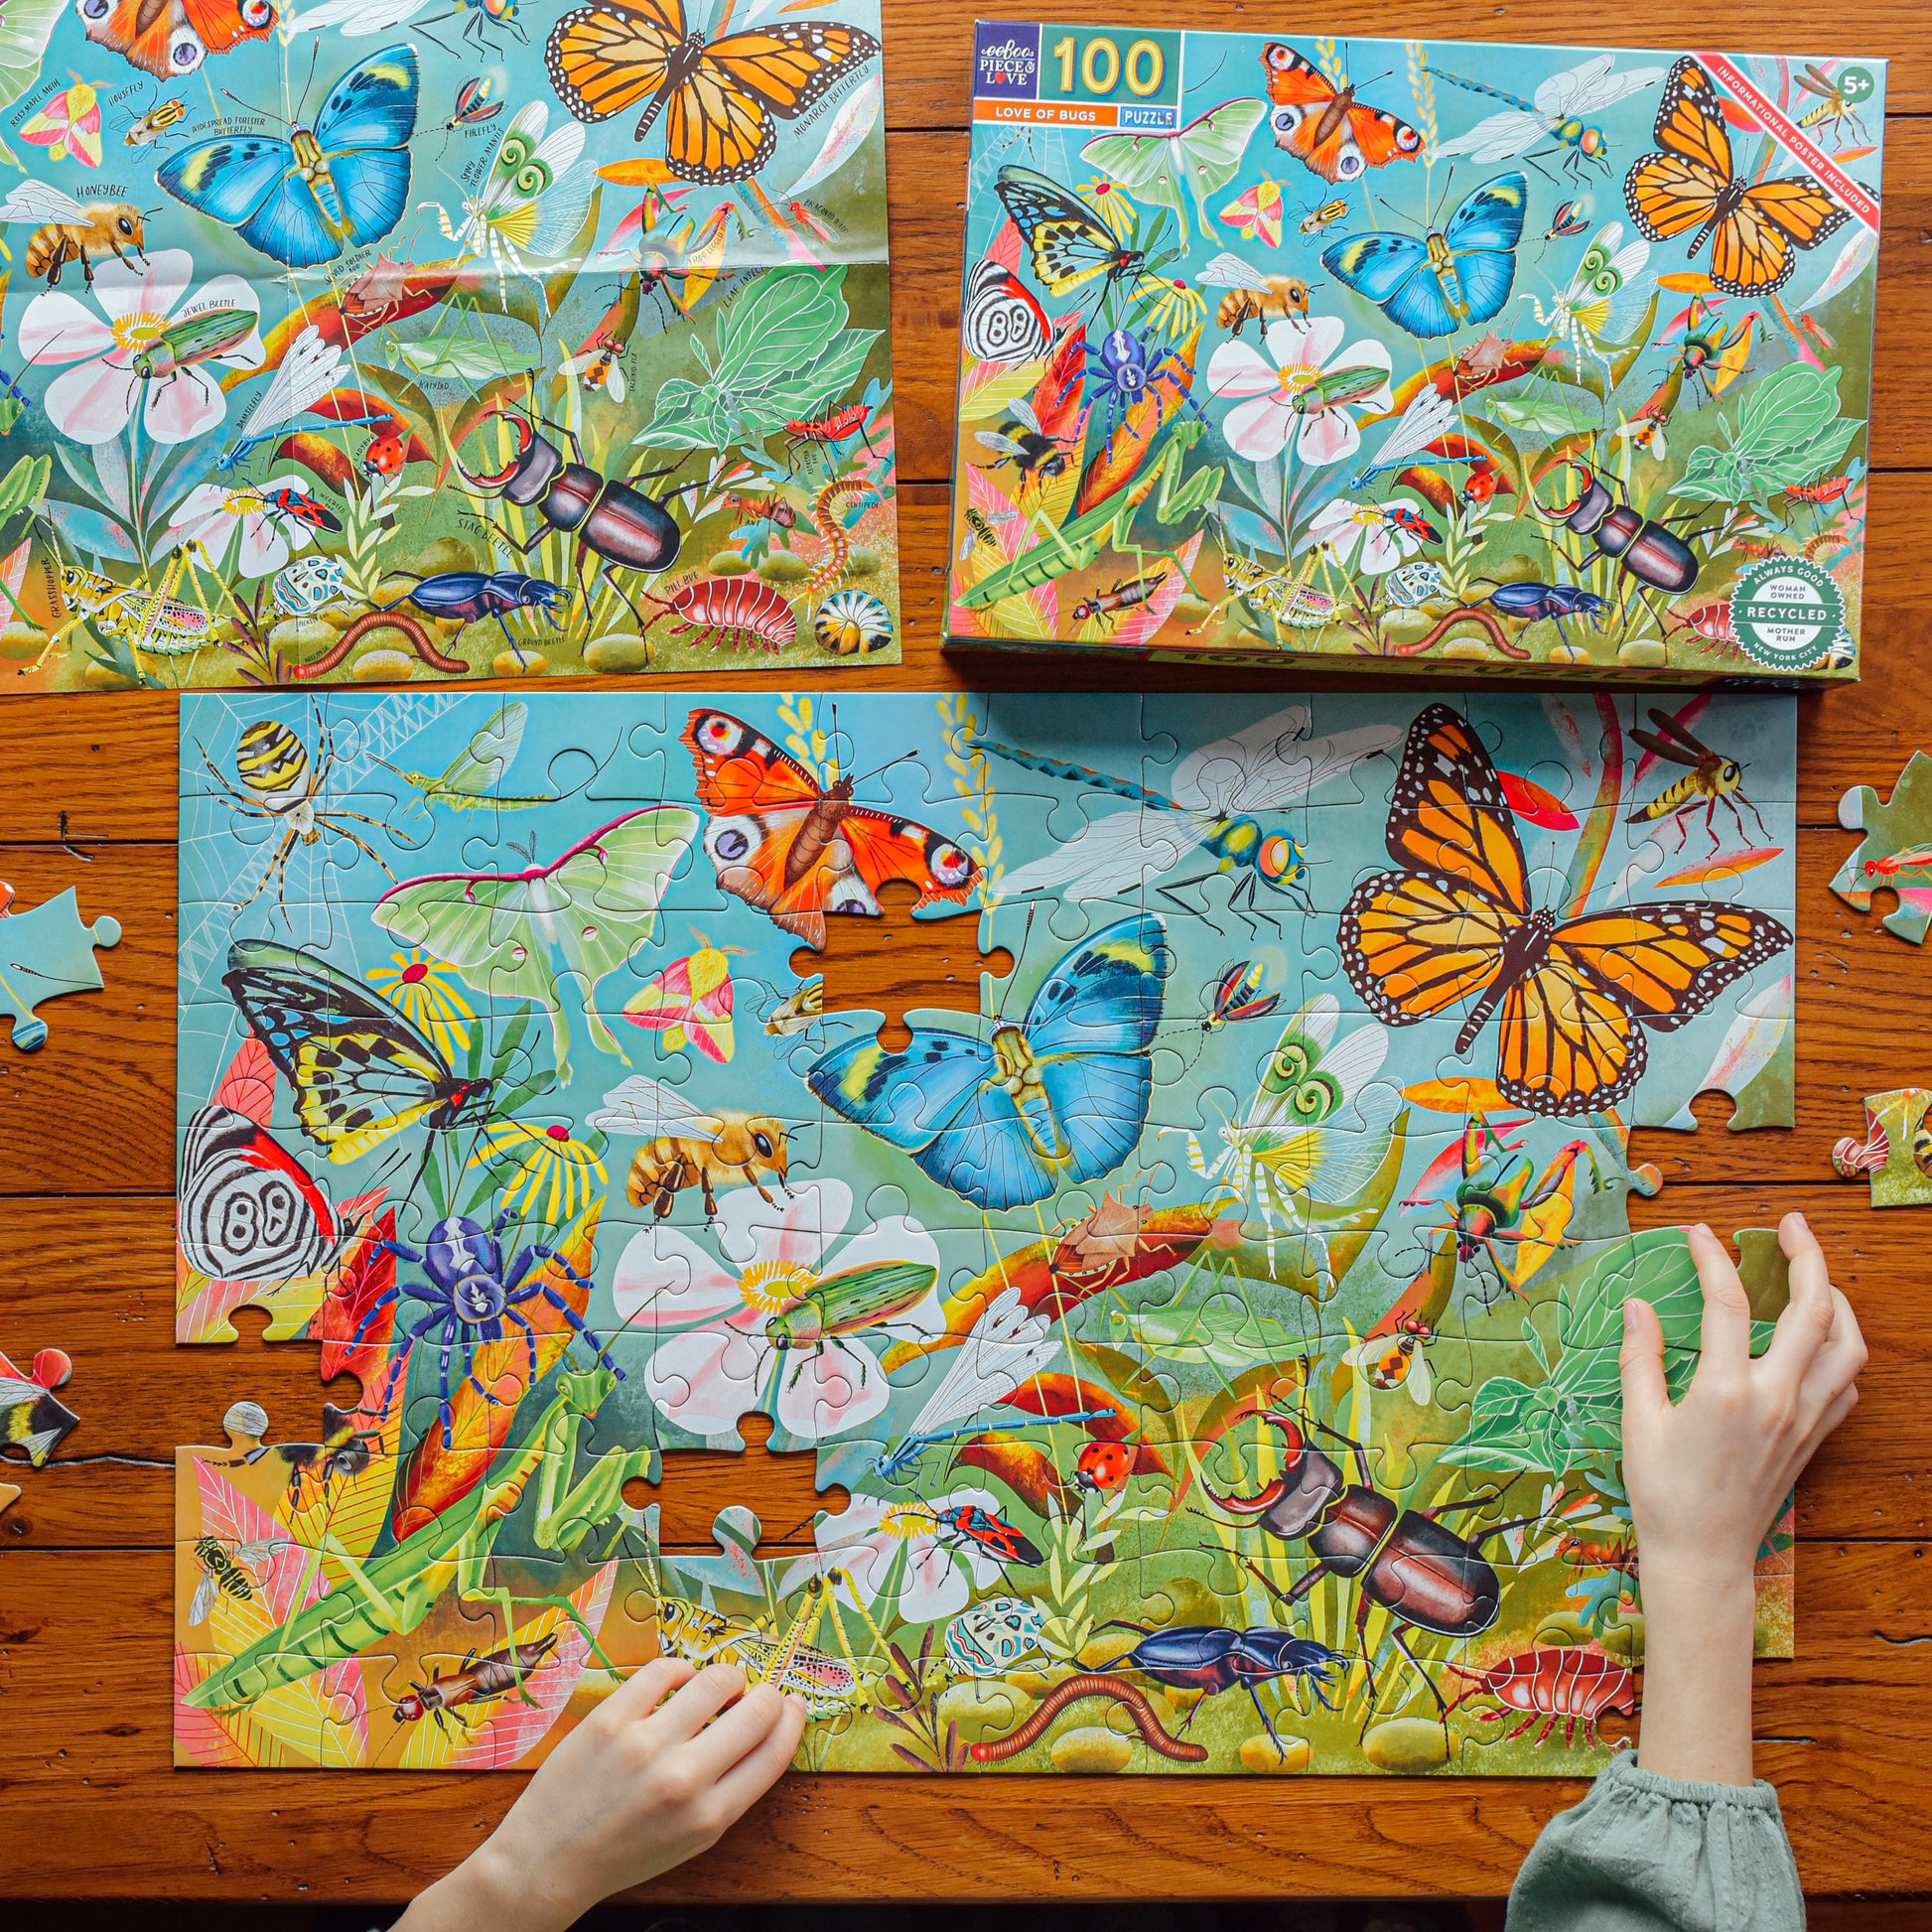 Love of Bugs 100 Piece Puzzle | Unique Fun Gifts for Kids Ages 5+